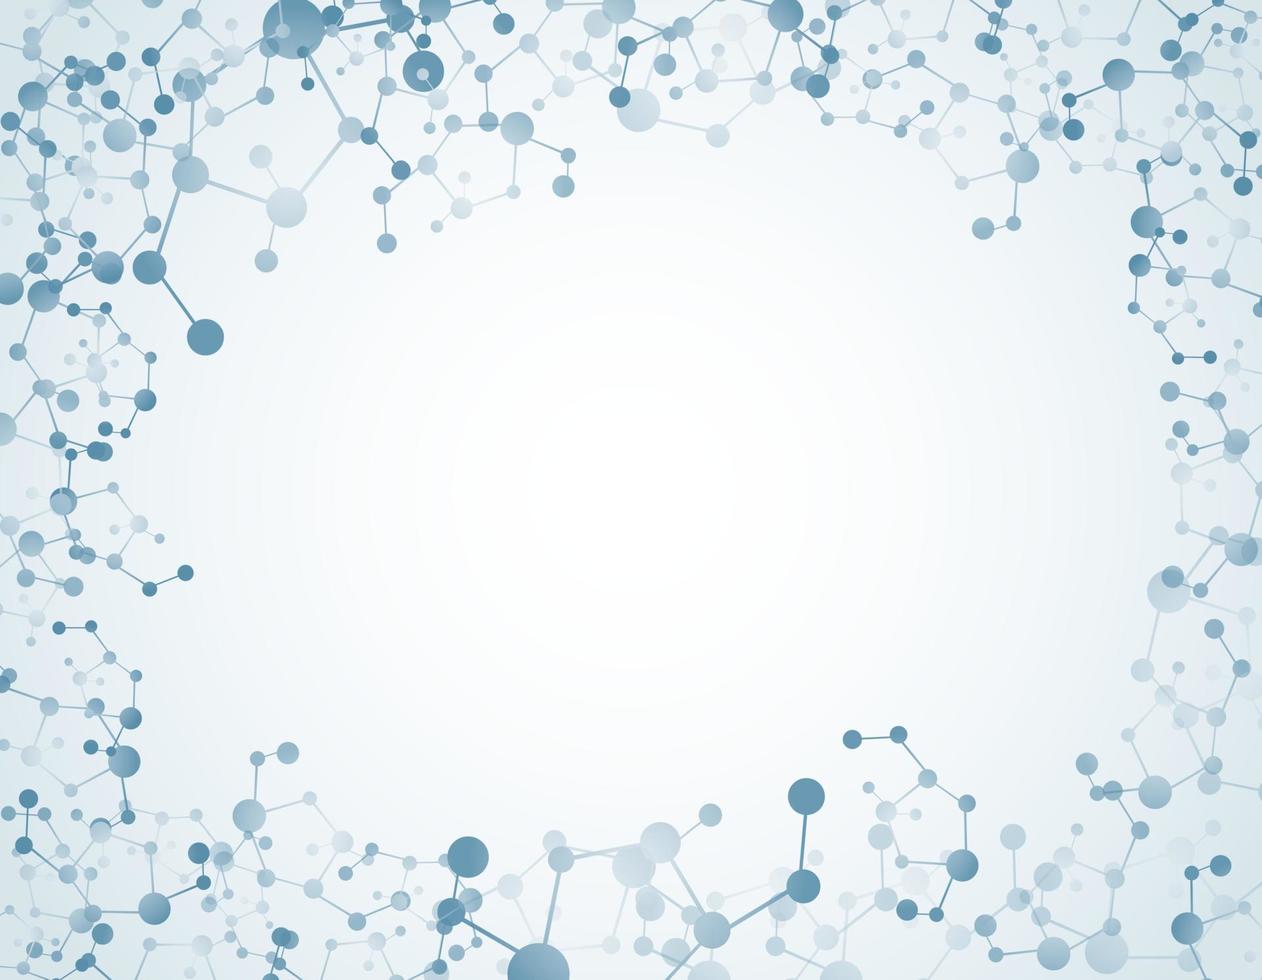 Molecules on isolated  background vector